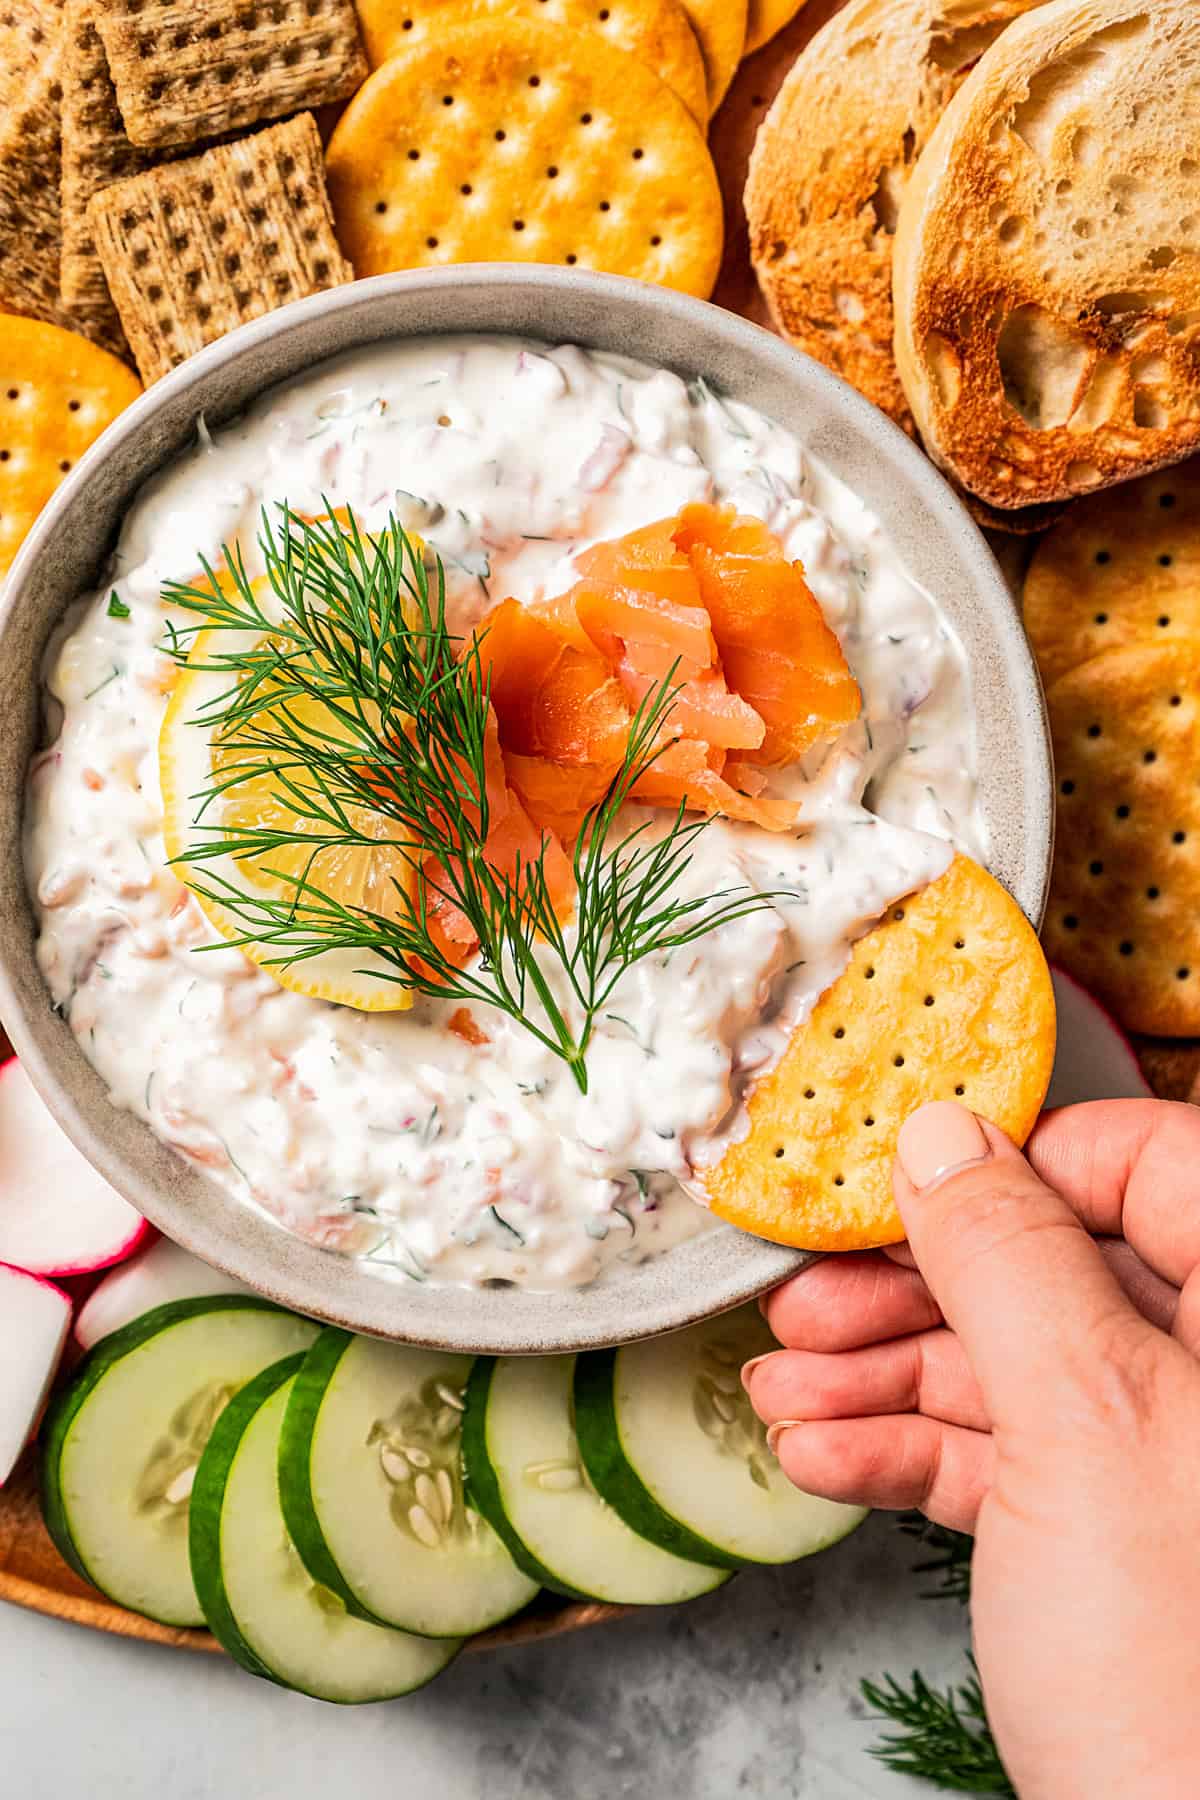 Hand dipping a cracker into a bowl of dip garnished with smoked salmon, lemon, and a fresh dill sprig, surrounded by a platter of crackers and crudités.